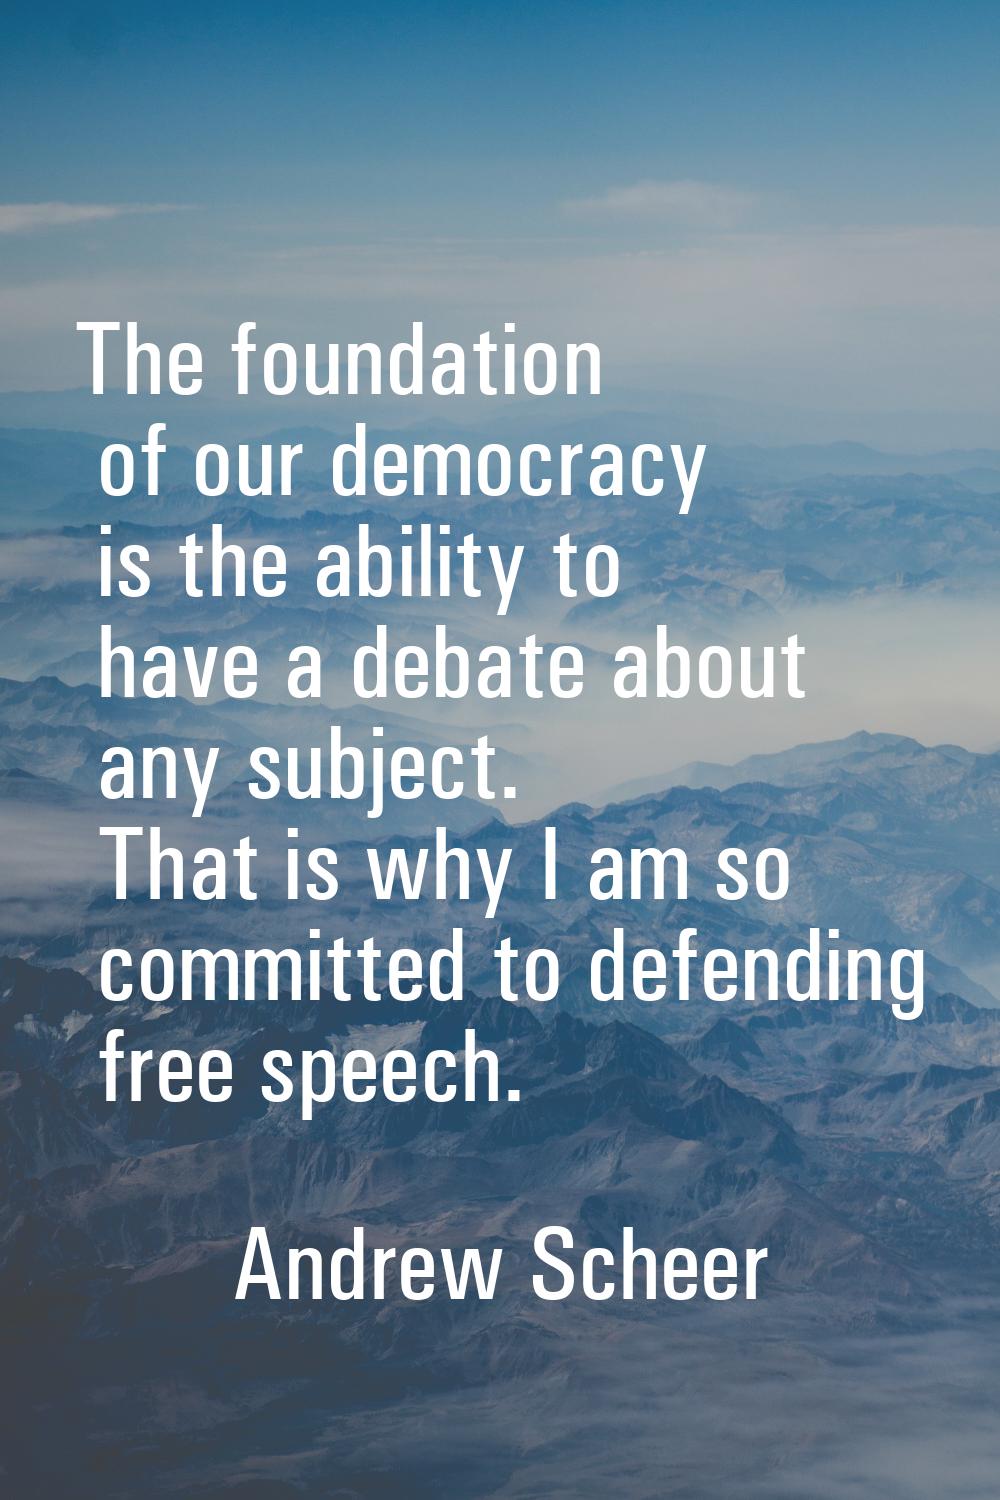 The foundation of our democracy is the ability to have a debate about any subject. That is why I am